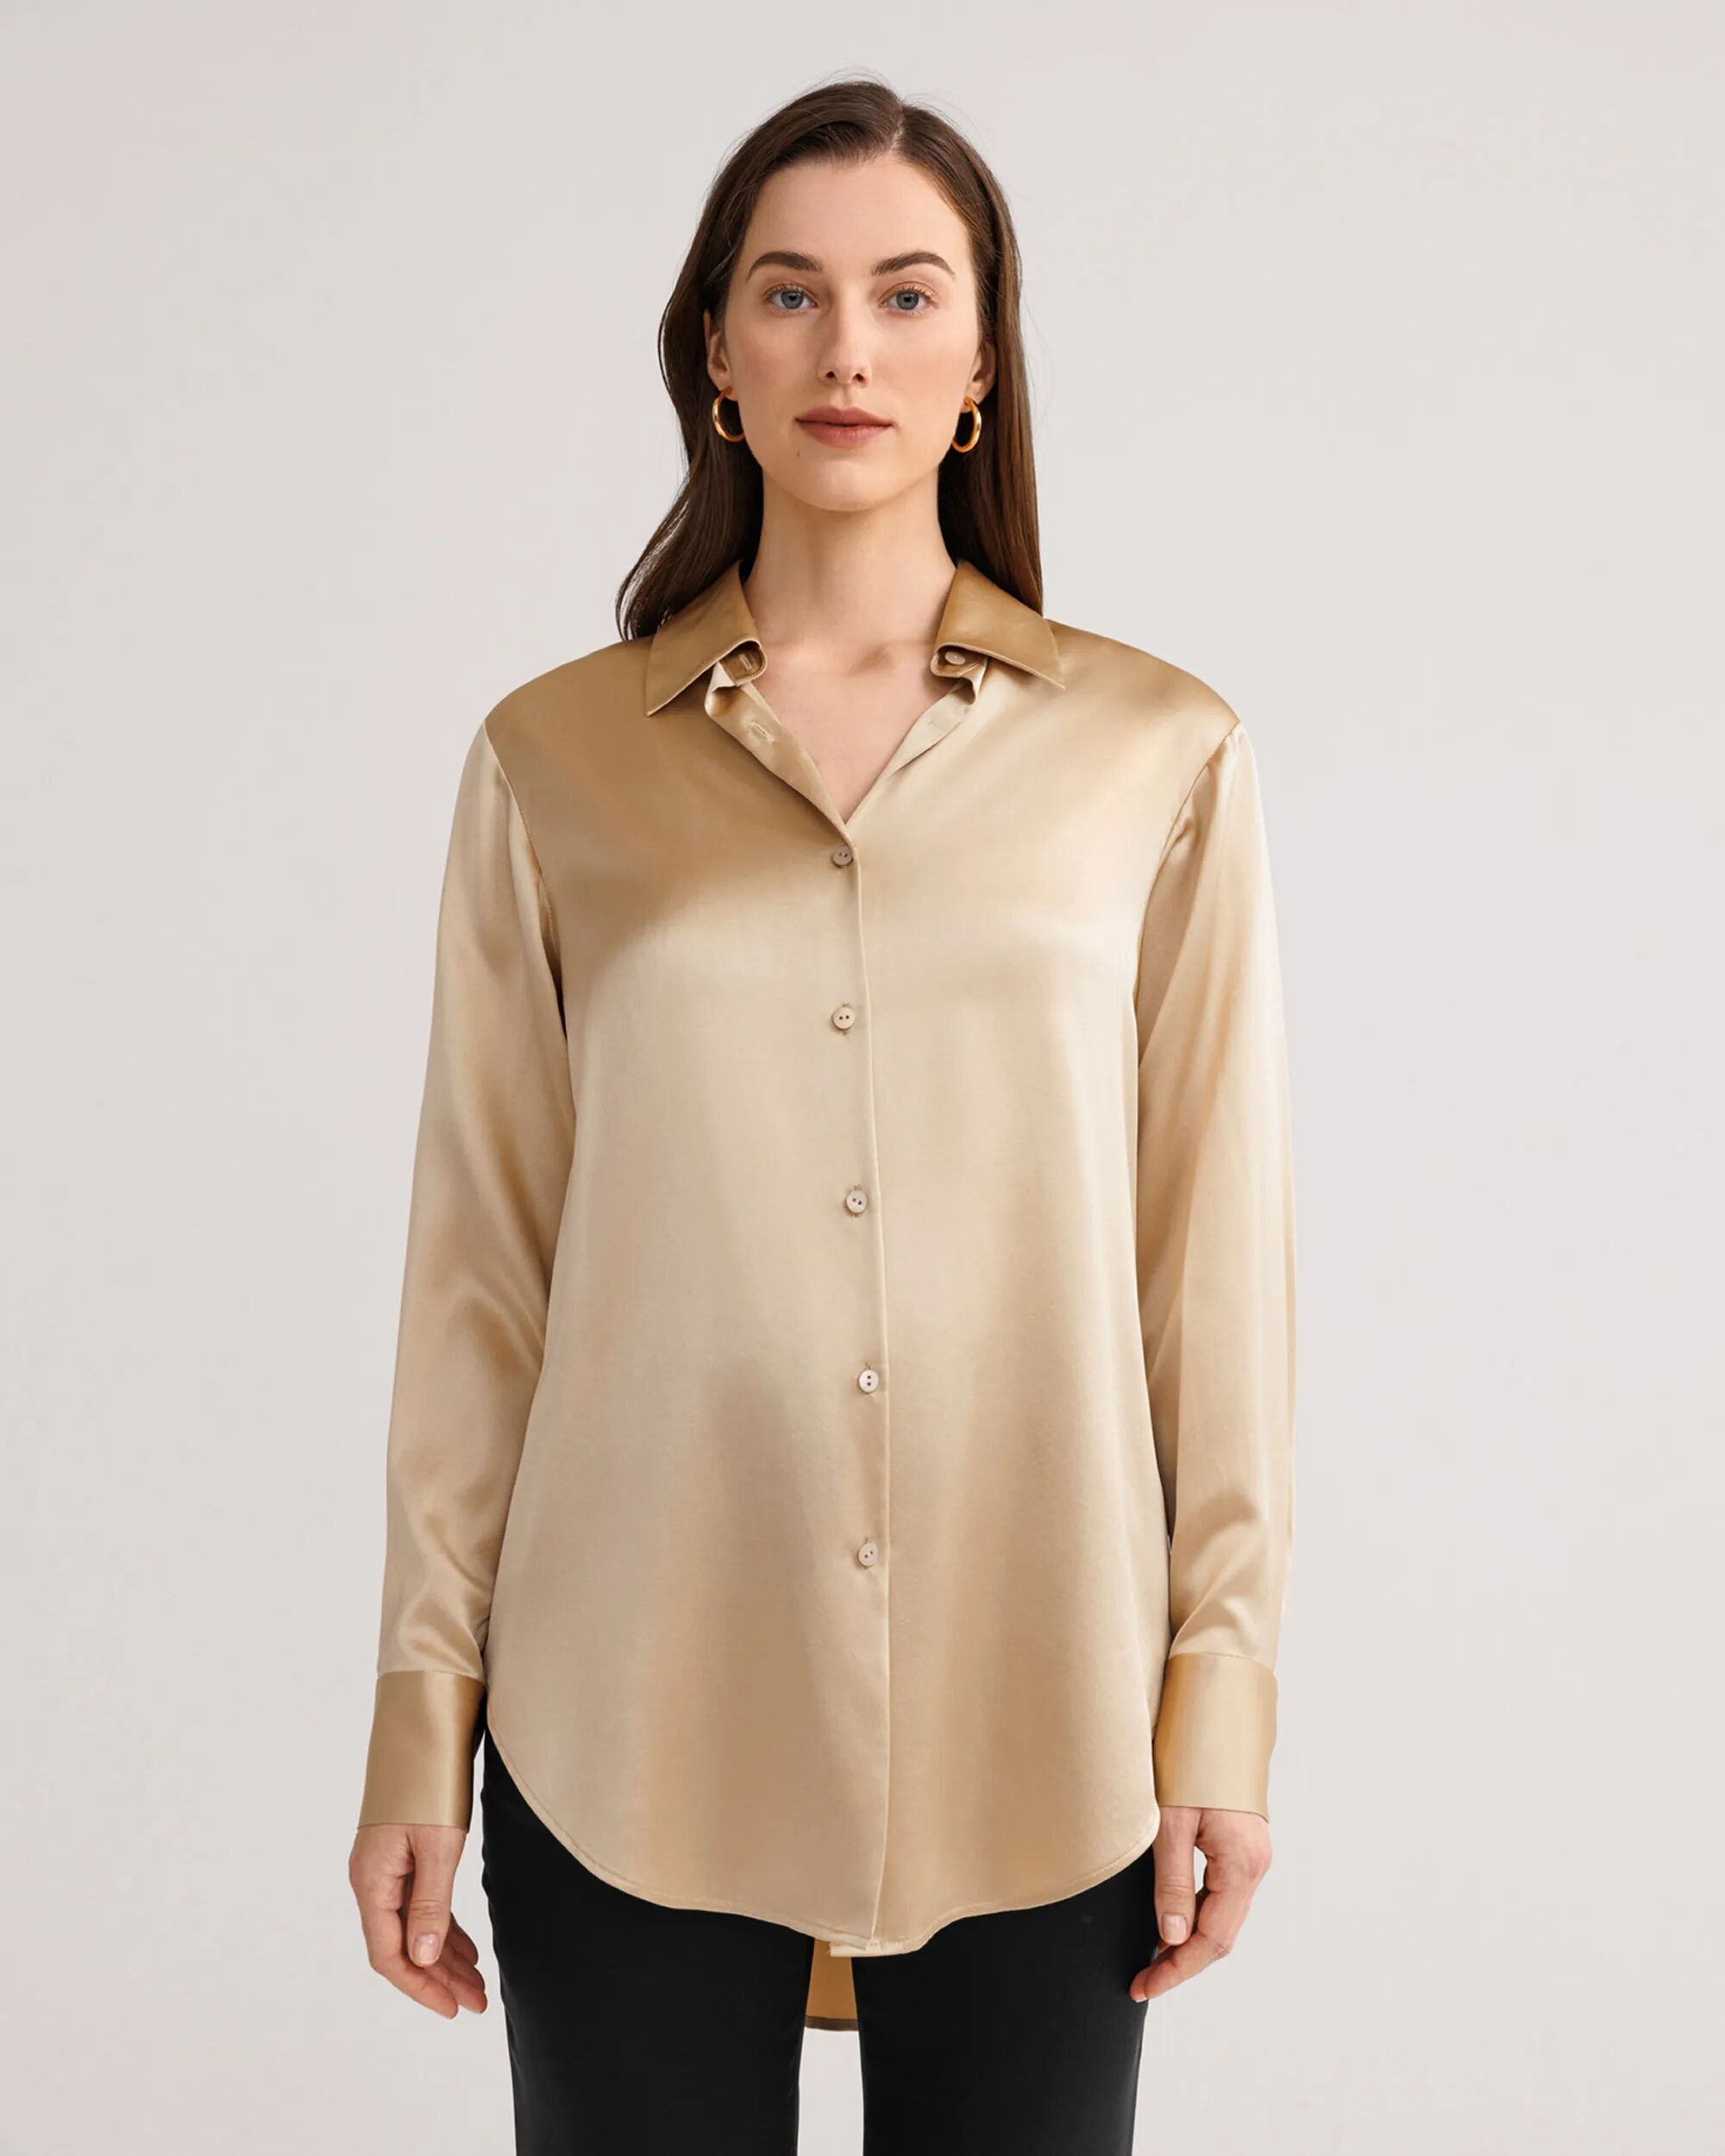 LILYSILK Business Gold Silk Shirt   Striped   Silk Blouse For Women Light Camel 22 Momme Smooth Menswear-Inspired Oversized Fit XS